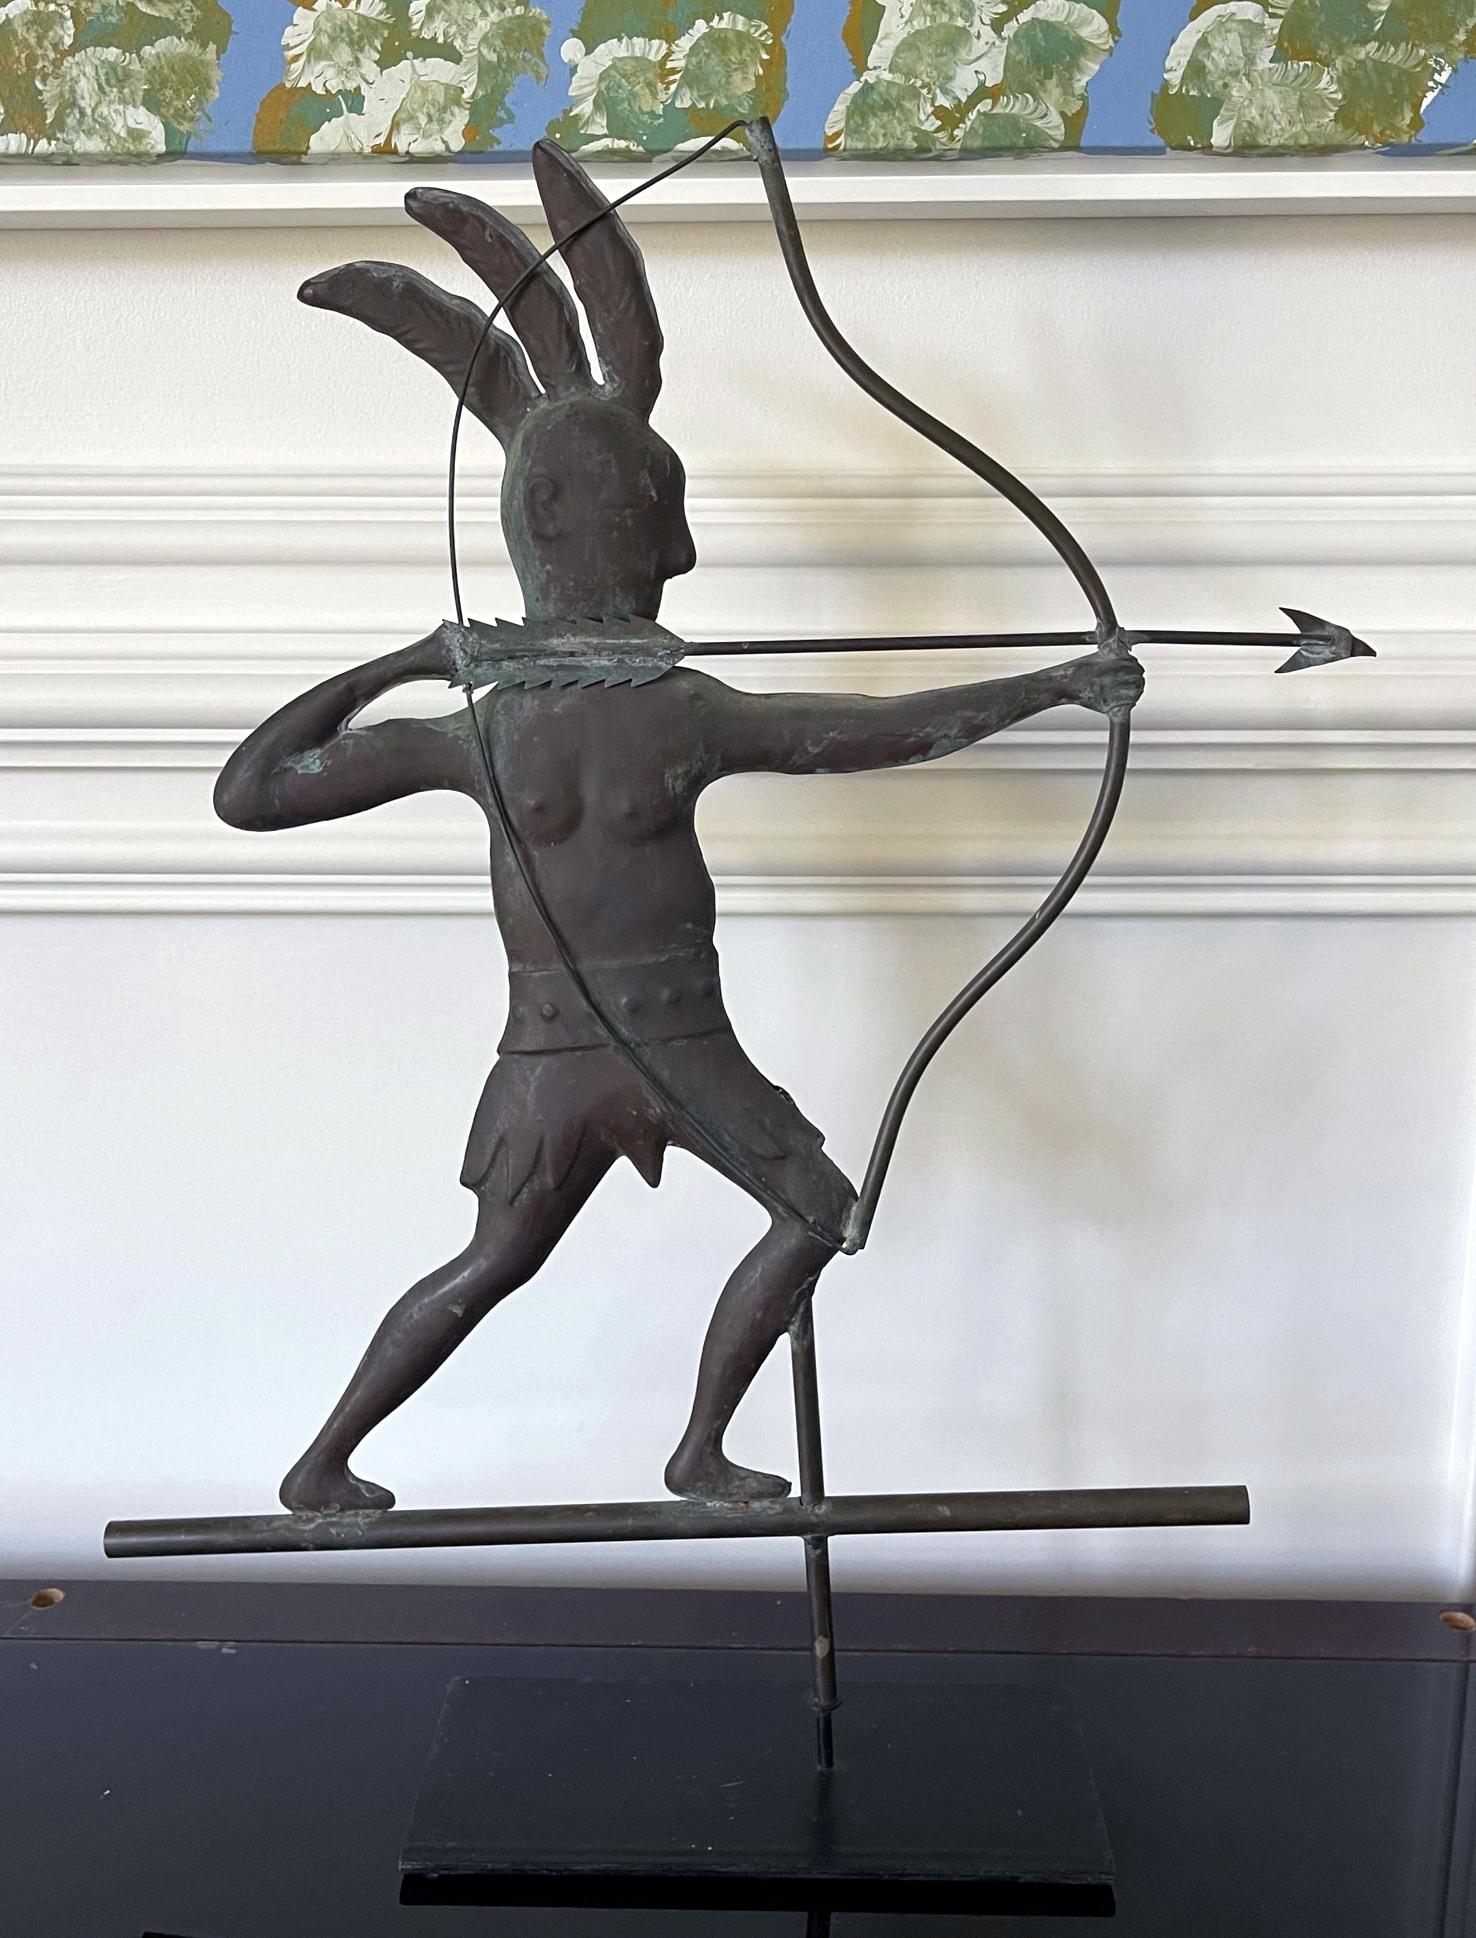 An Americana folk art copper weathervane circa early 20th century. The full-bodied piece depicts a Native American warrior in feather headdress and a wide belt shooting an arrow from his bow. The silouette showcases a strong graphic design and